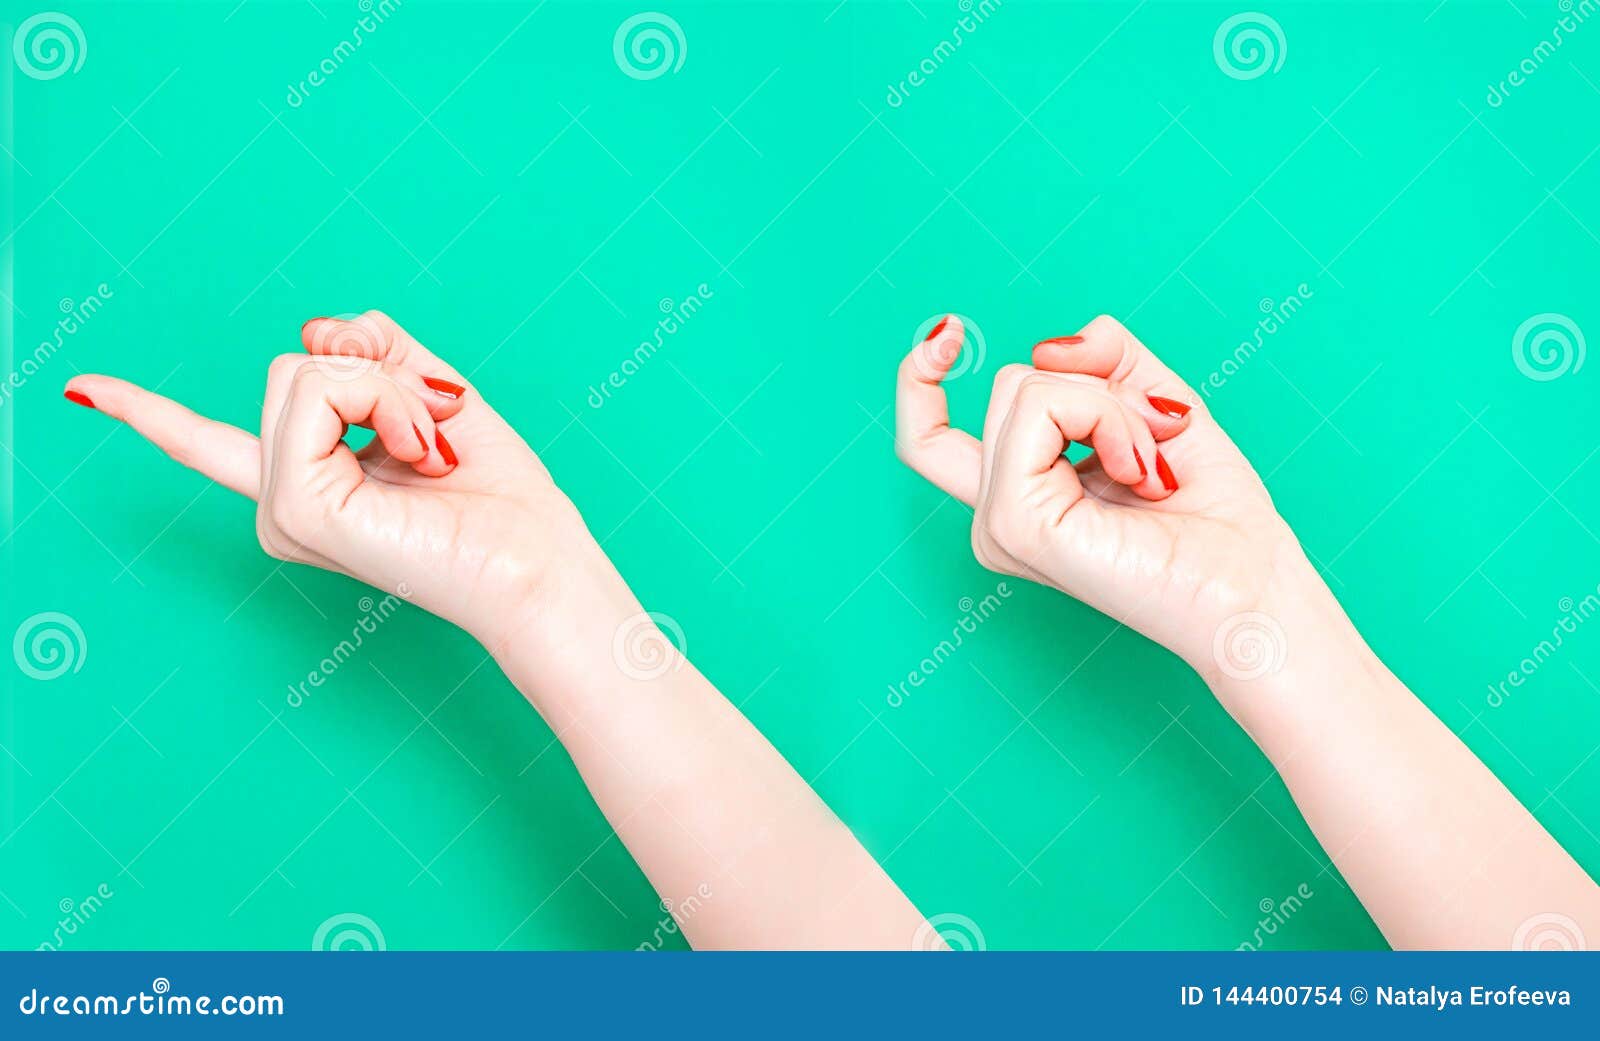 the come hither hand sign. woman hand beckoning on  turquoise green color background. female hand beckoning